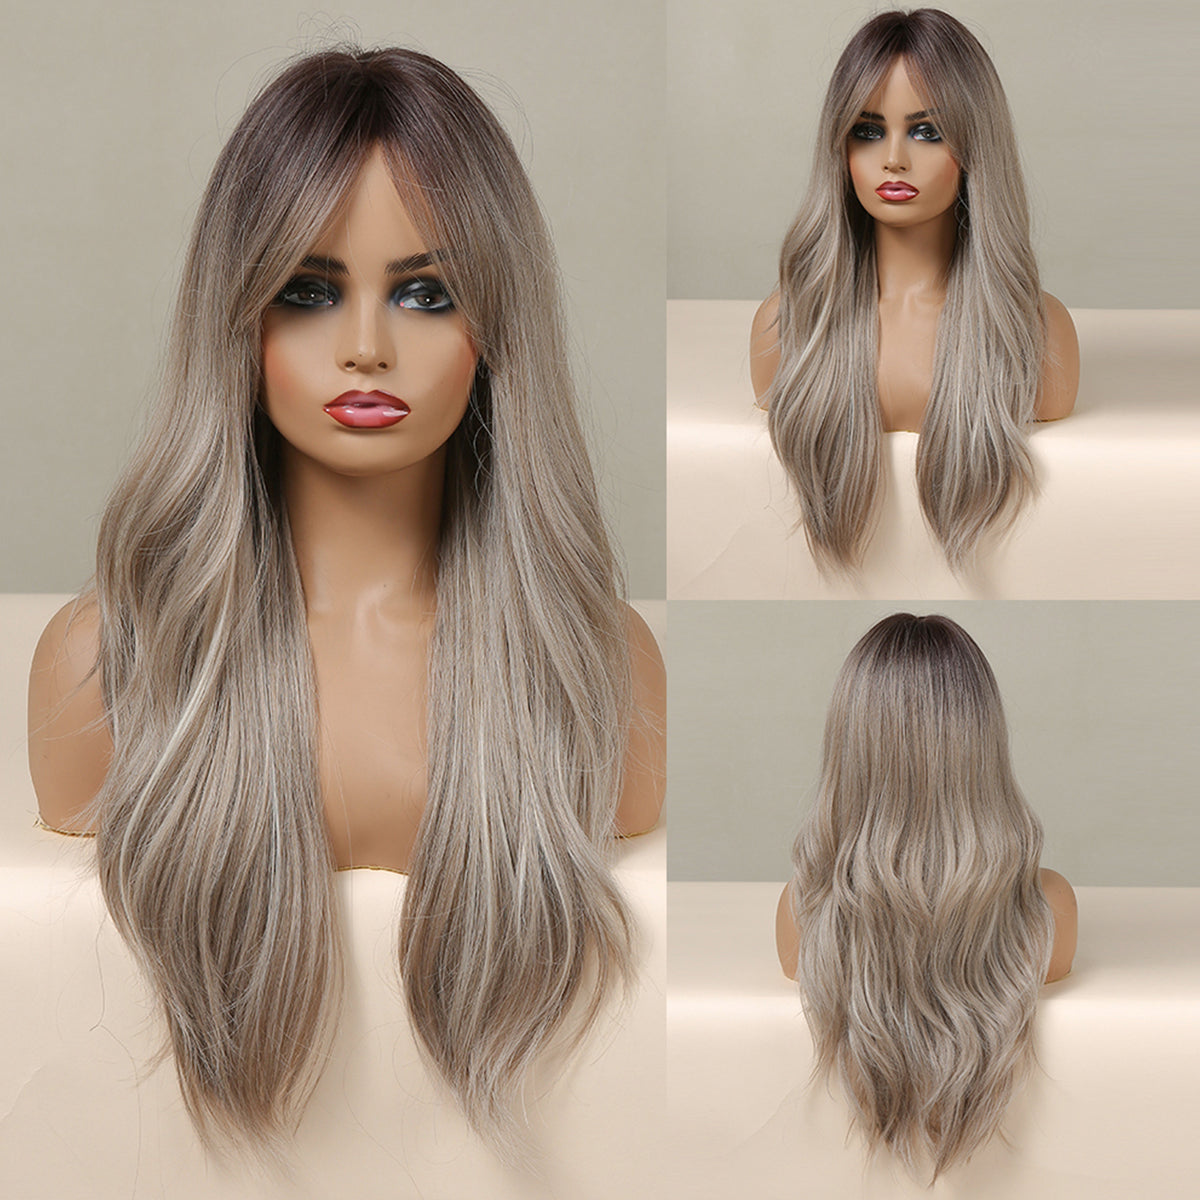 24 Inch Inch Long Ombre Gray With Middle Part Bang Wavy Curly Wig Heat Resistant Synthetic Wig For Women Natural Comfortable Fashion Party Diy Daily LC457-1